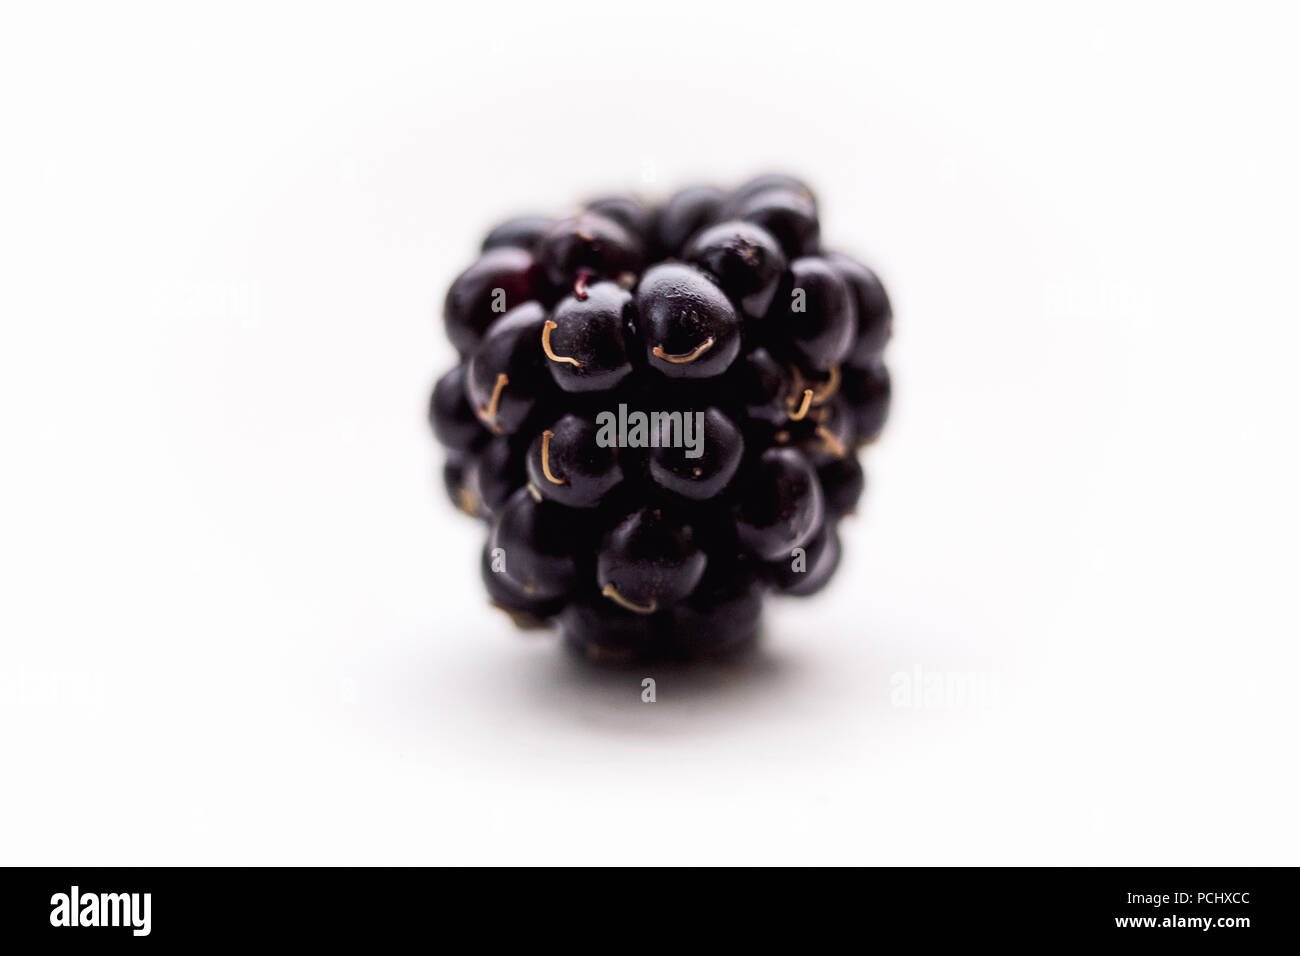 One blackberry close up on a white background Stock Photo